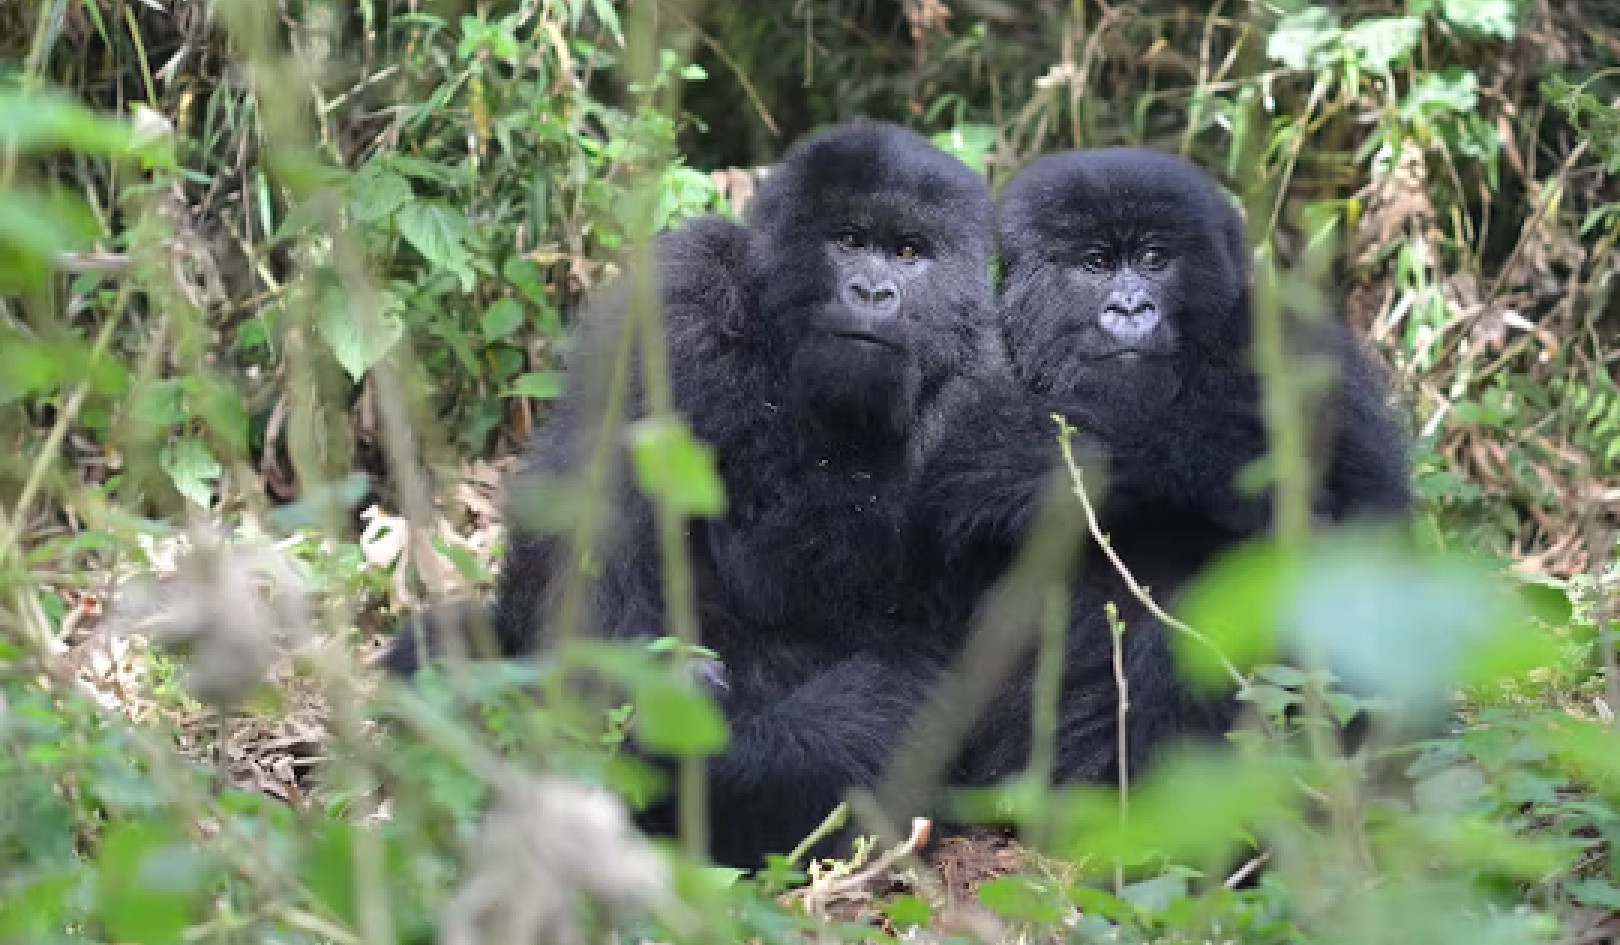 Thriving in the Face of Adversity: Resilient Gorillas Reveal Clues about Overcoming Childhood Misfortune